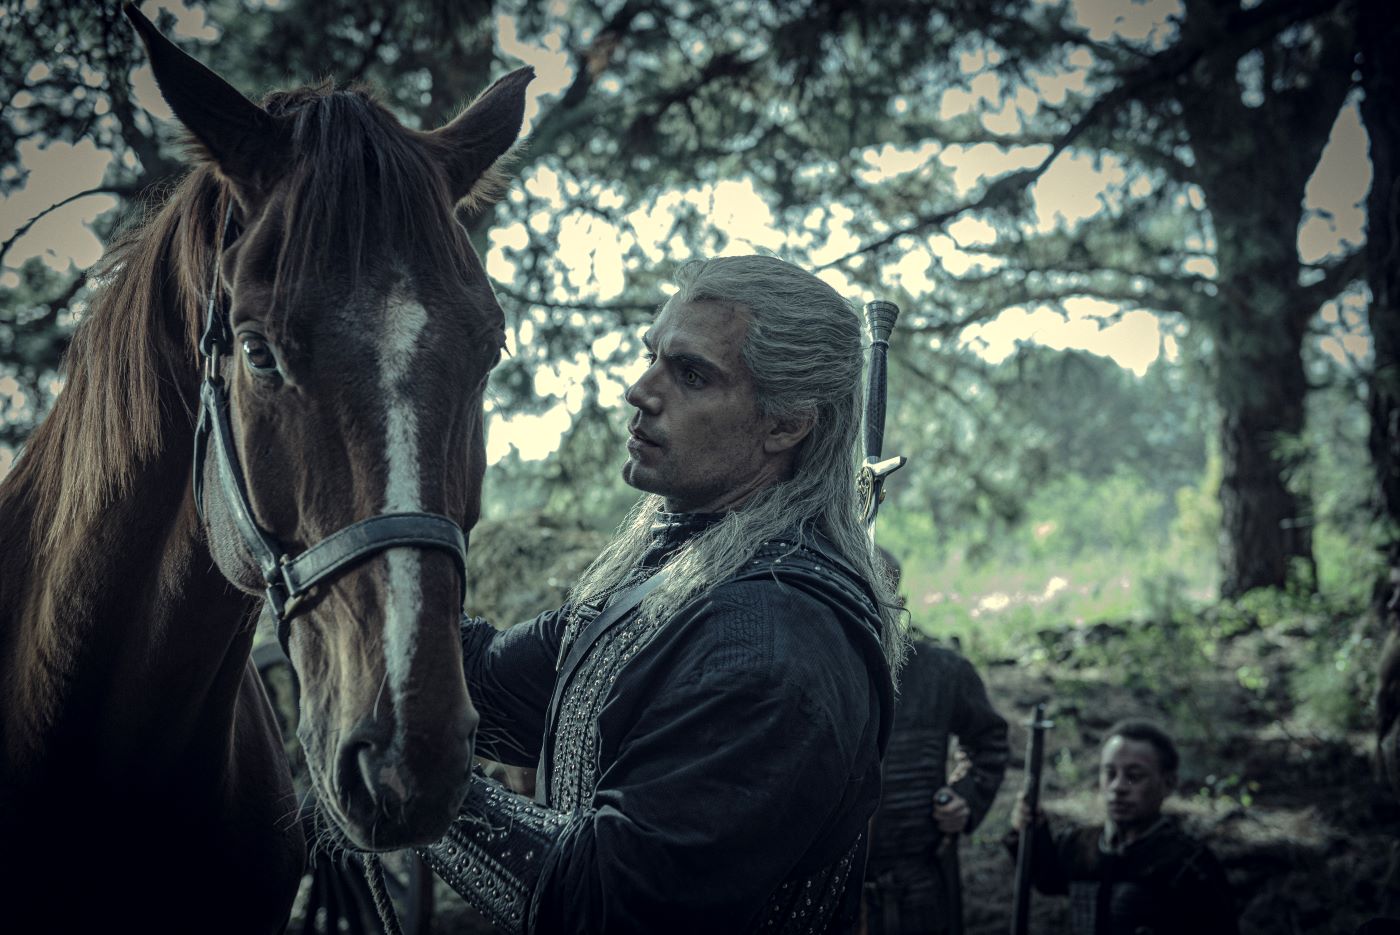 A picture of Geralt from The Witcher and his horse Roach in a wooded area.